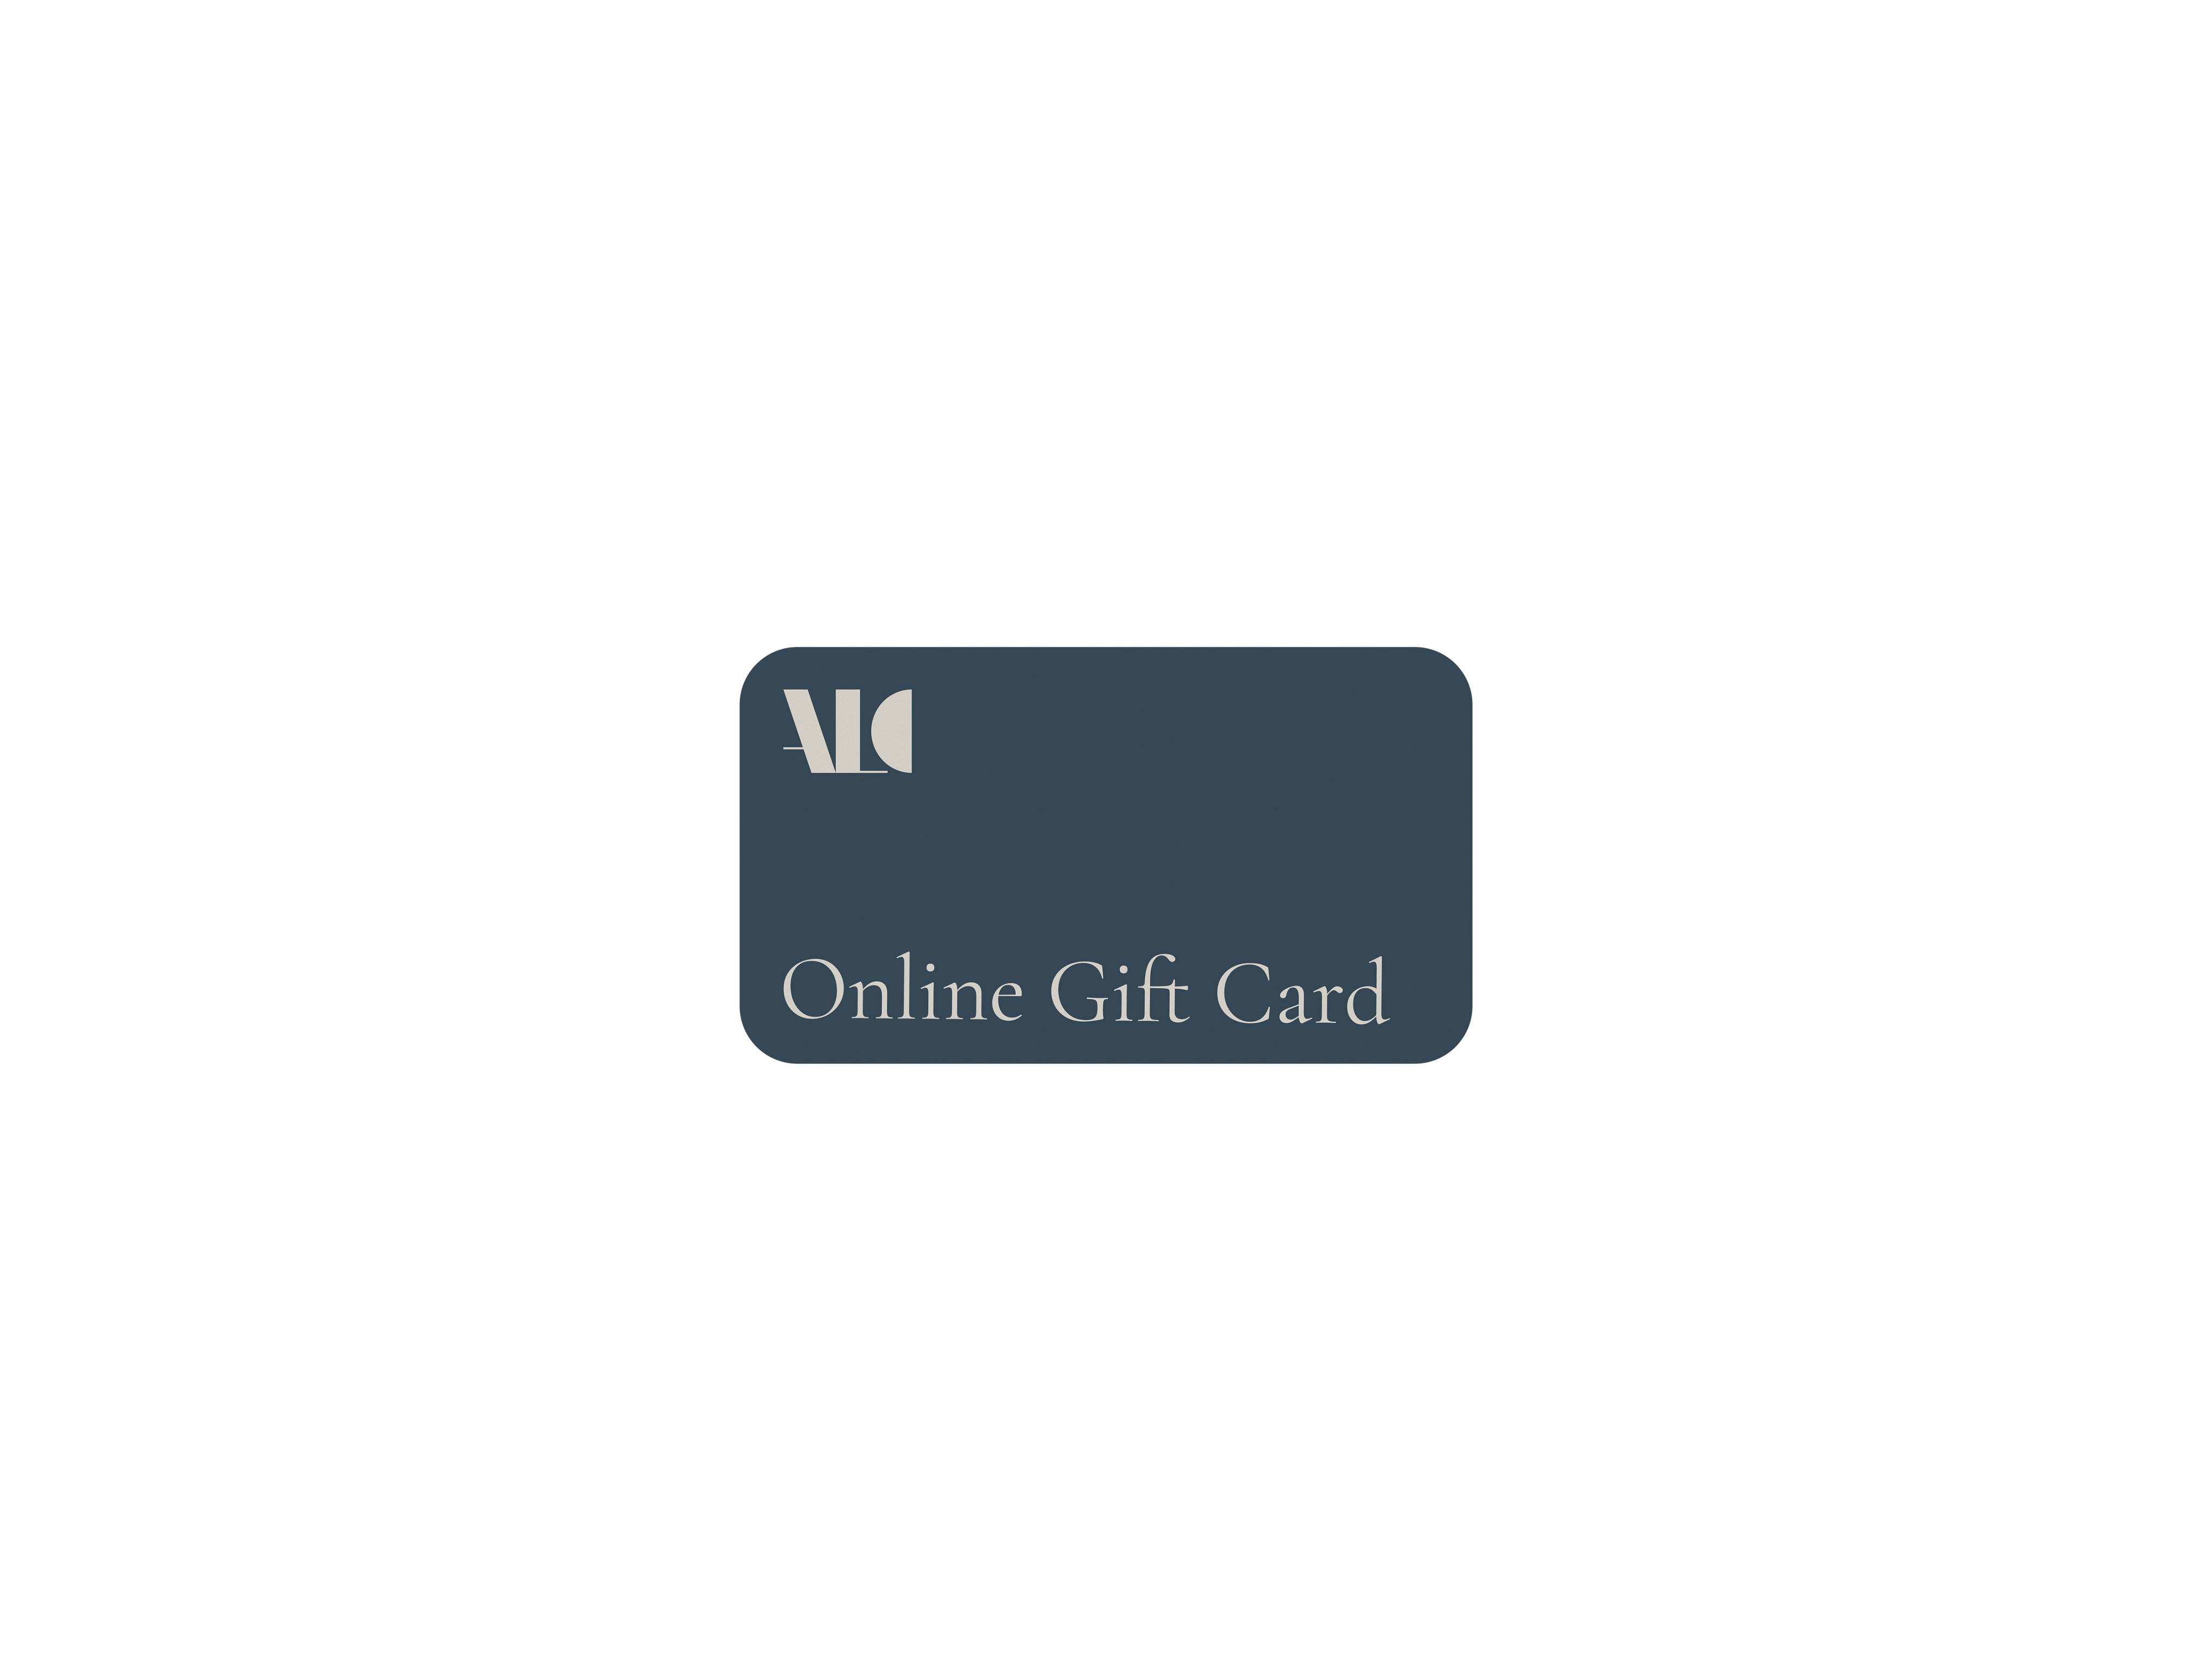 Replace the product in the sentence below with the given product name and brand name.
Sentence: Digital ALC Online Gift Card design with icon and text, perfect for solving any gifting dilemma, allowing recipients to redeem its value easily.